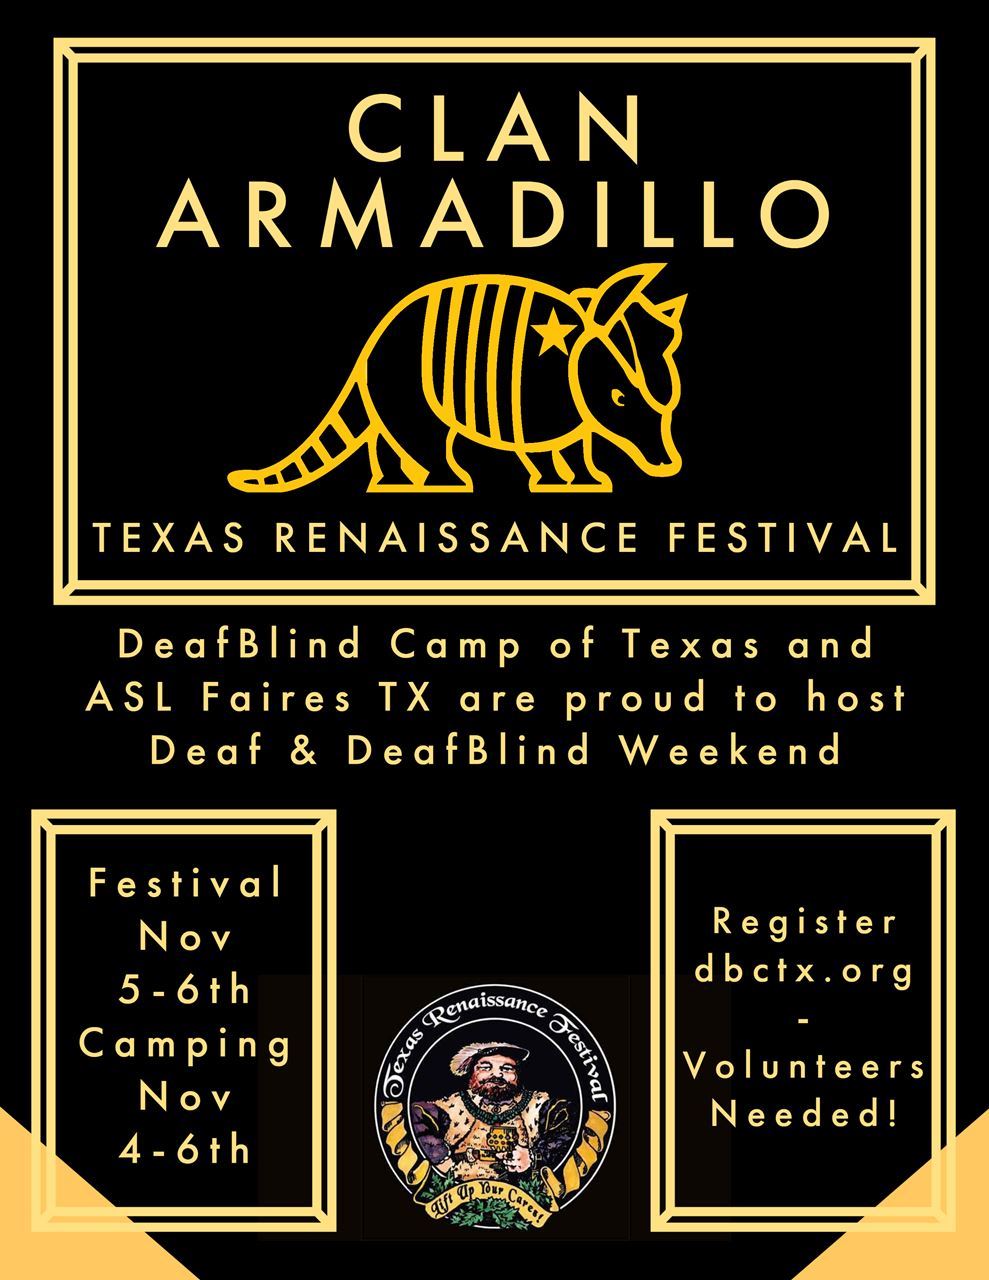 Yellow text on black. Clan Armadillo. Image of DBCTX Armadillo in Yellow. Texas Renaissance Festival. DeafBlind Camp of Texas and ASL Faires TX are proud to host Deaf & DeafBlind Weekend. Festival Nov 5-6th. Camping Nov 4-6th. Register dbctx.org. Volunteers Needed! Colorful TRF Logo. 